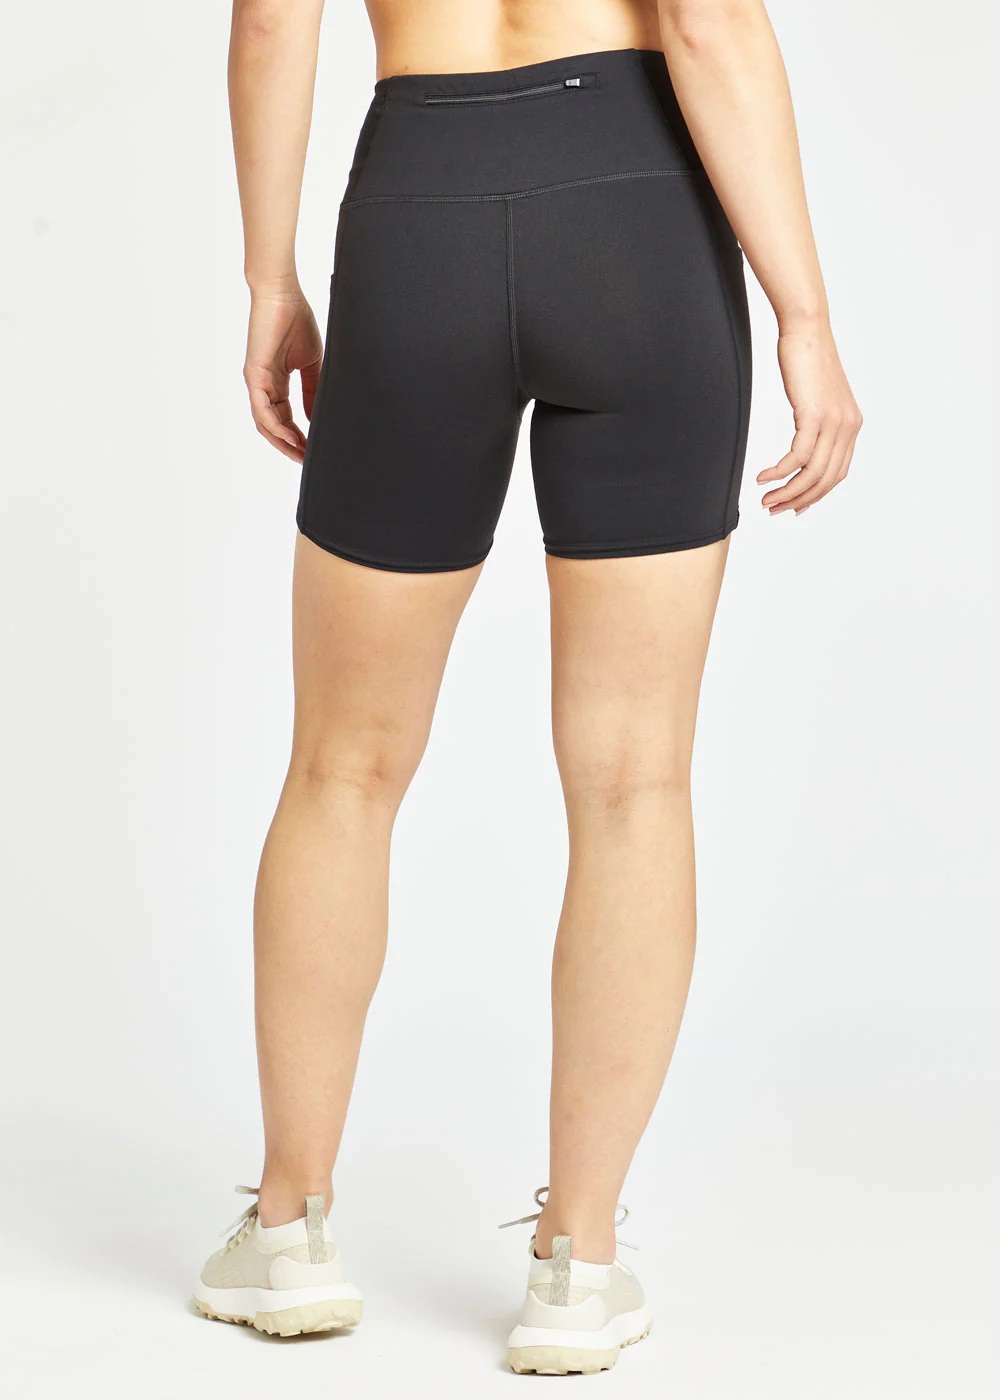 Women's Boxer Brief With Pocket 5